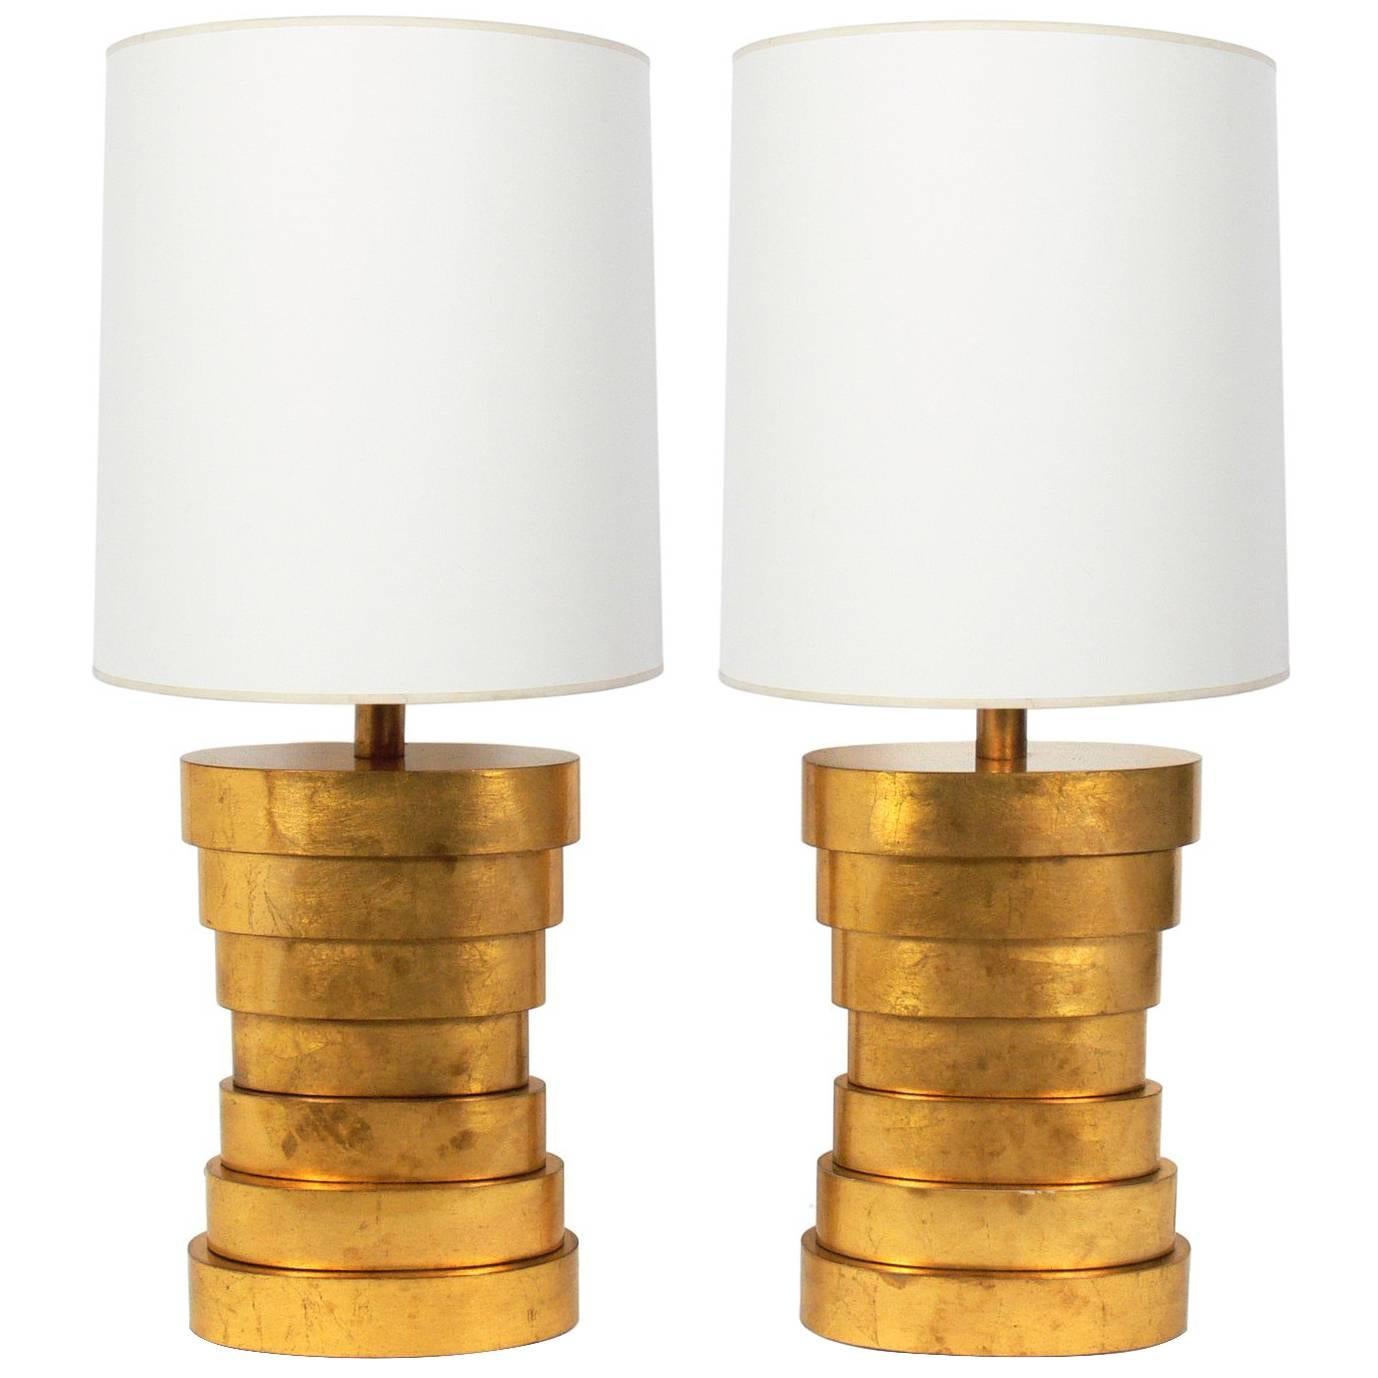 Large-Scale Gold Leafed Stacked Lamps